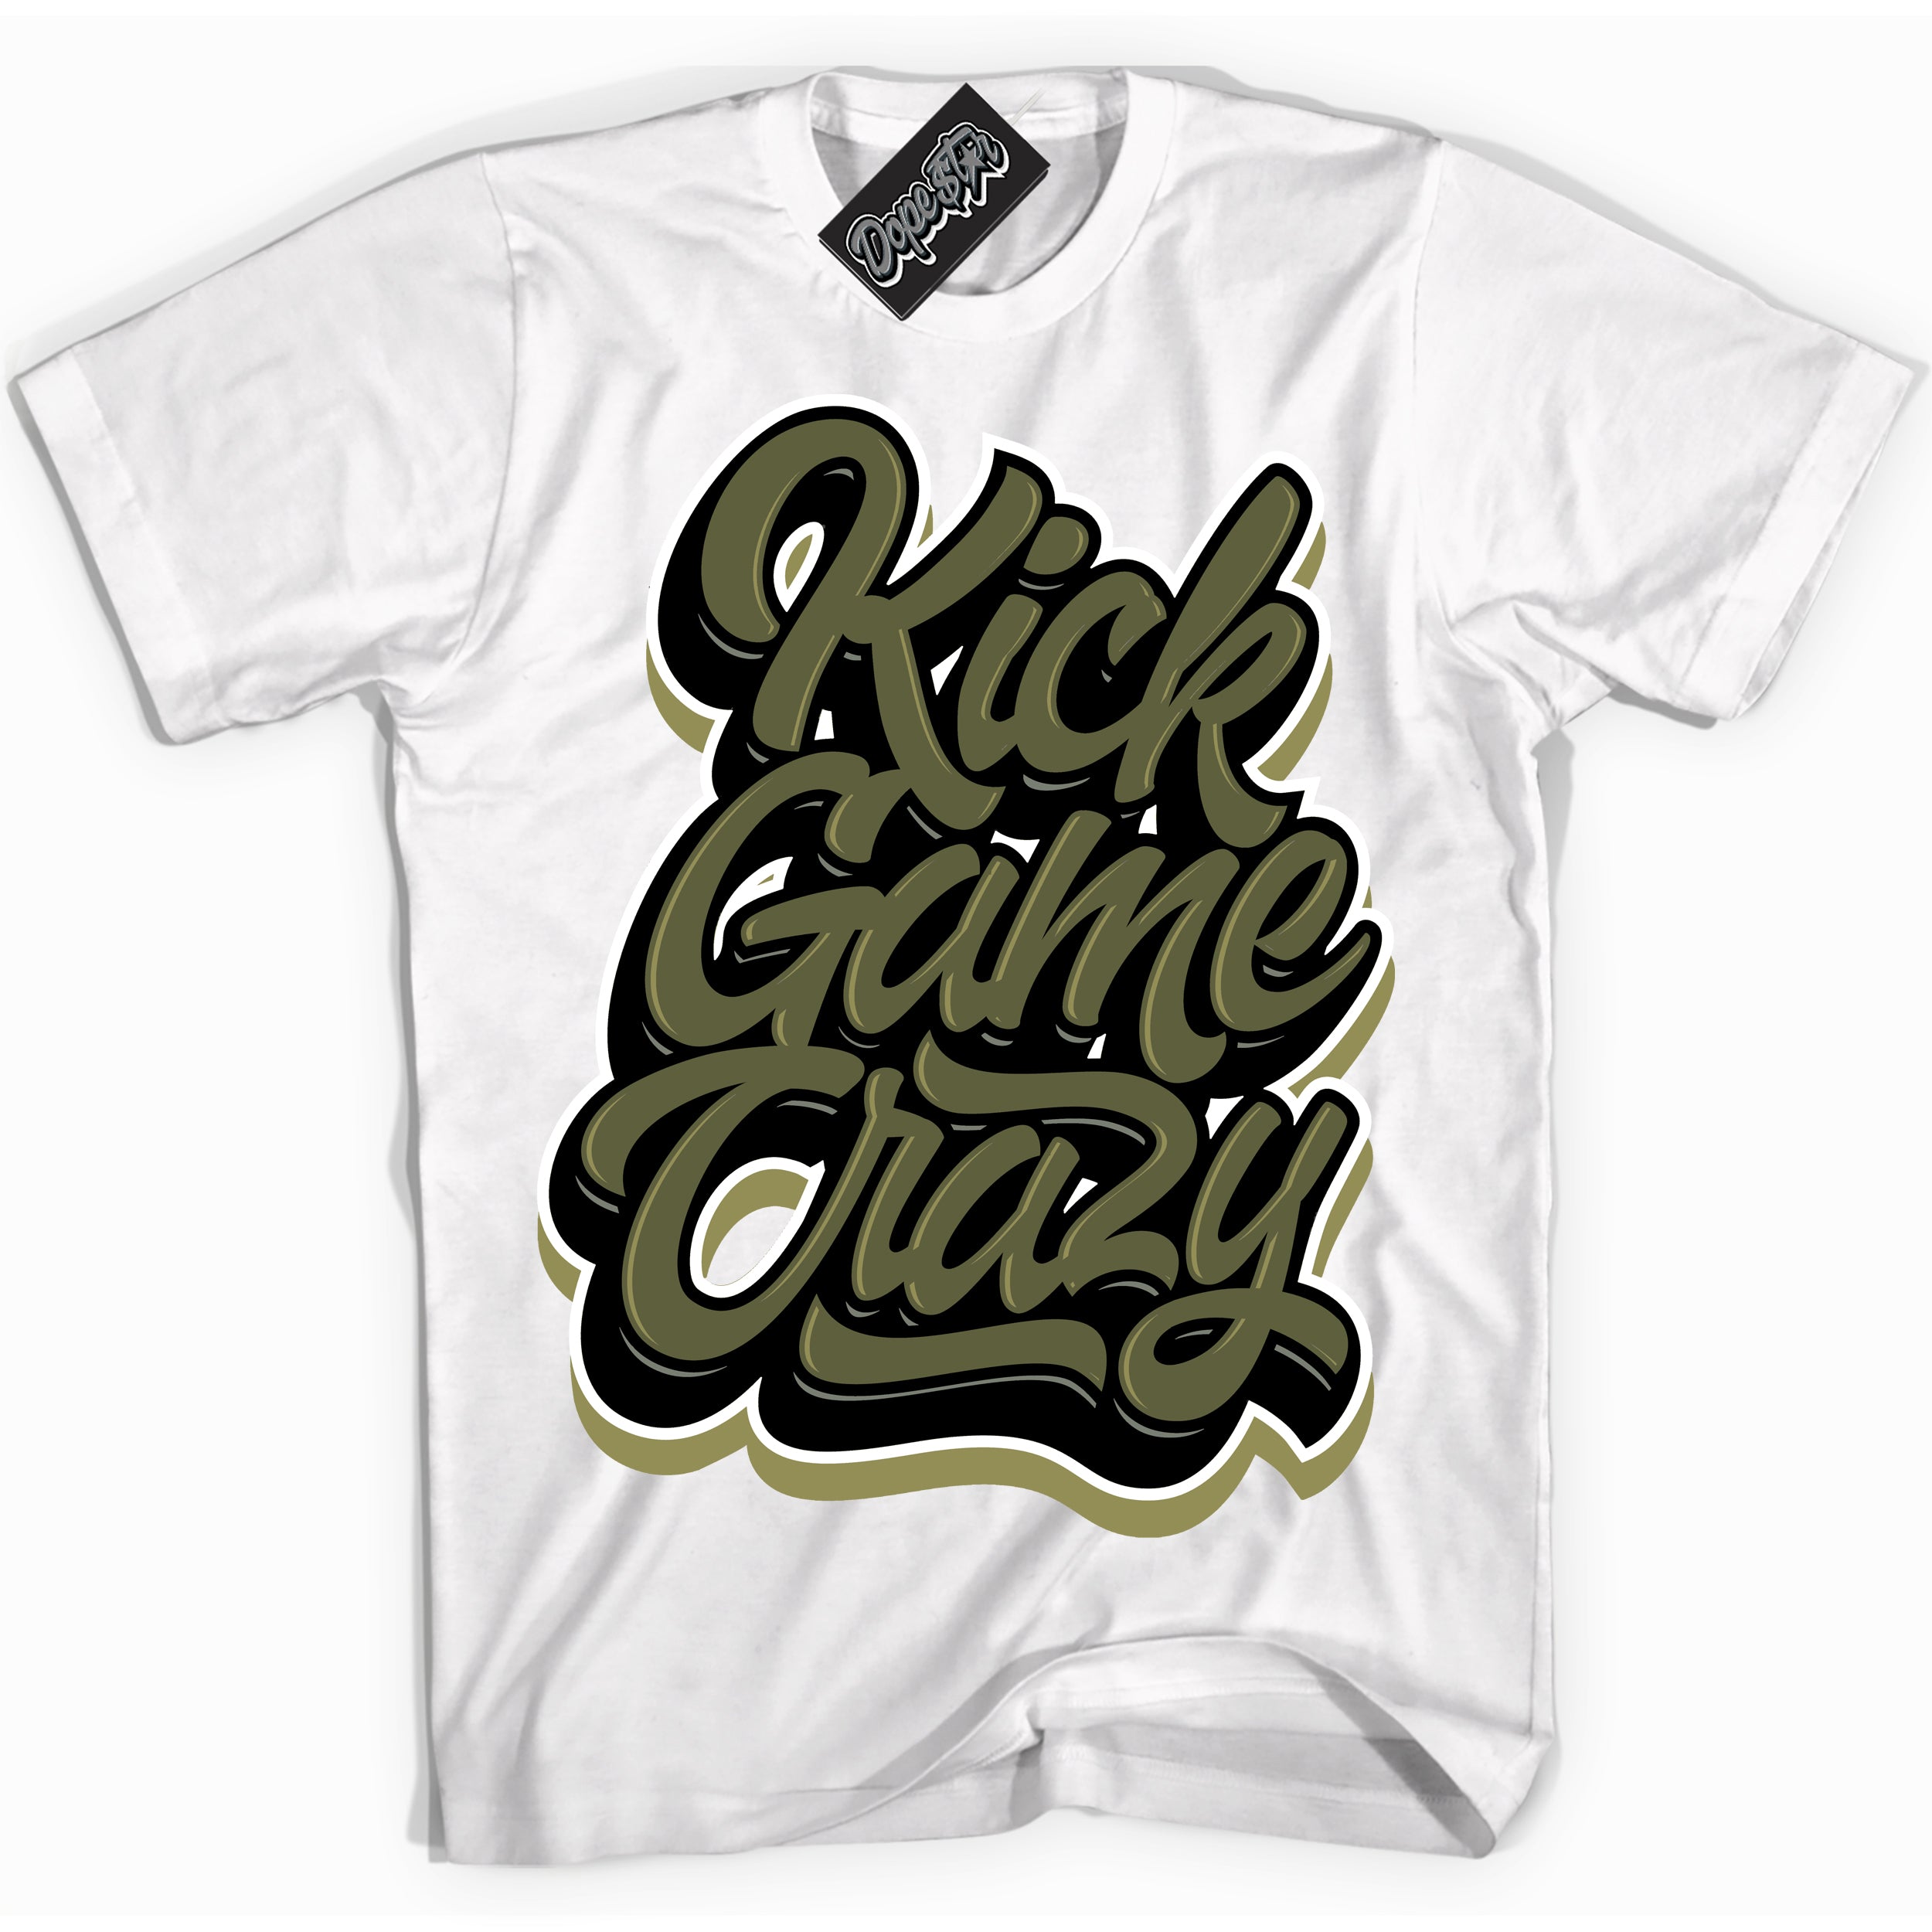 Cool White graphic tee with “ Kick Game Crazy ” print, that perfectly matches Craft Olive 4s sneakers 